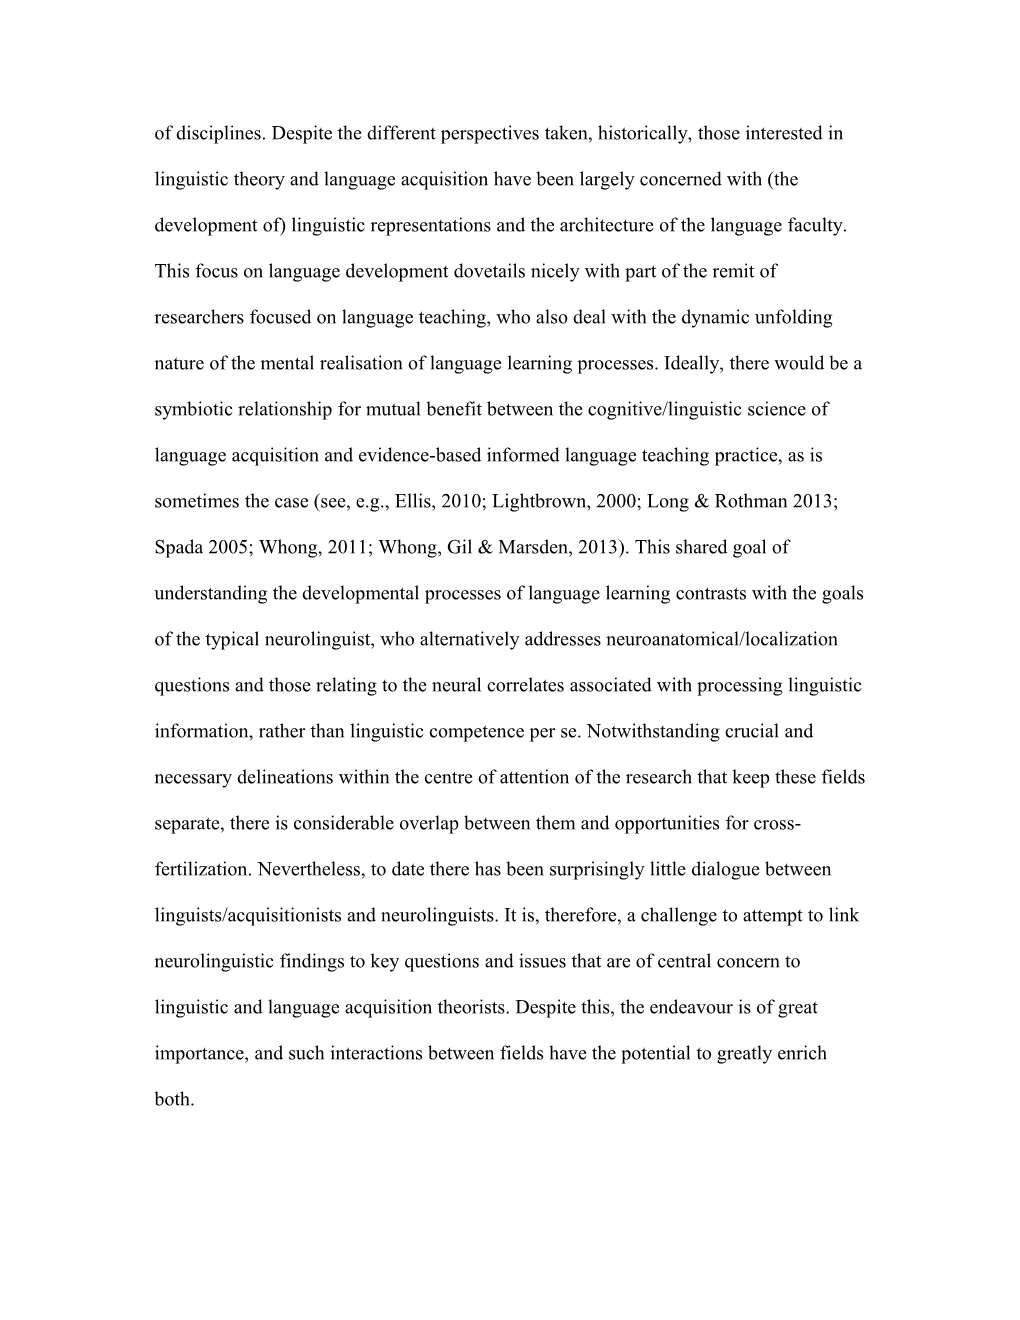 What Neurolinguistic Methodologies (Might) Tell Us About Linguistic and Language Acquisition